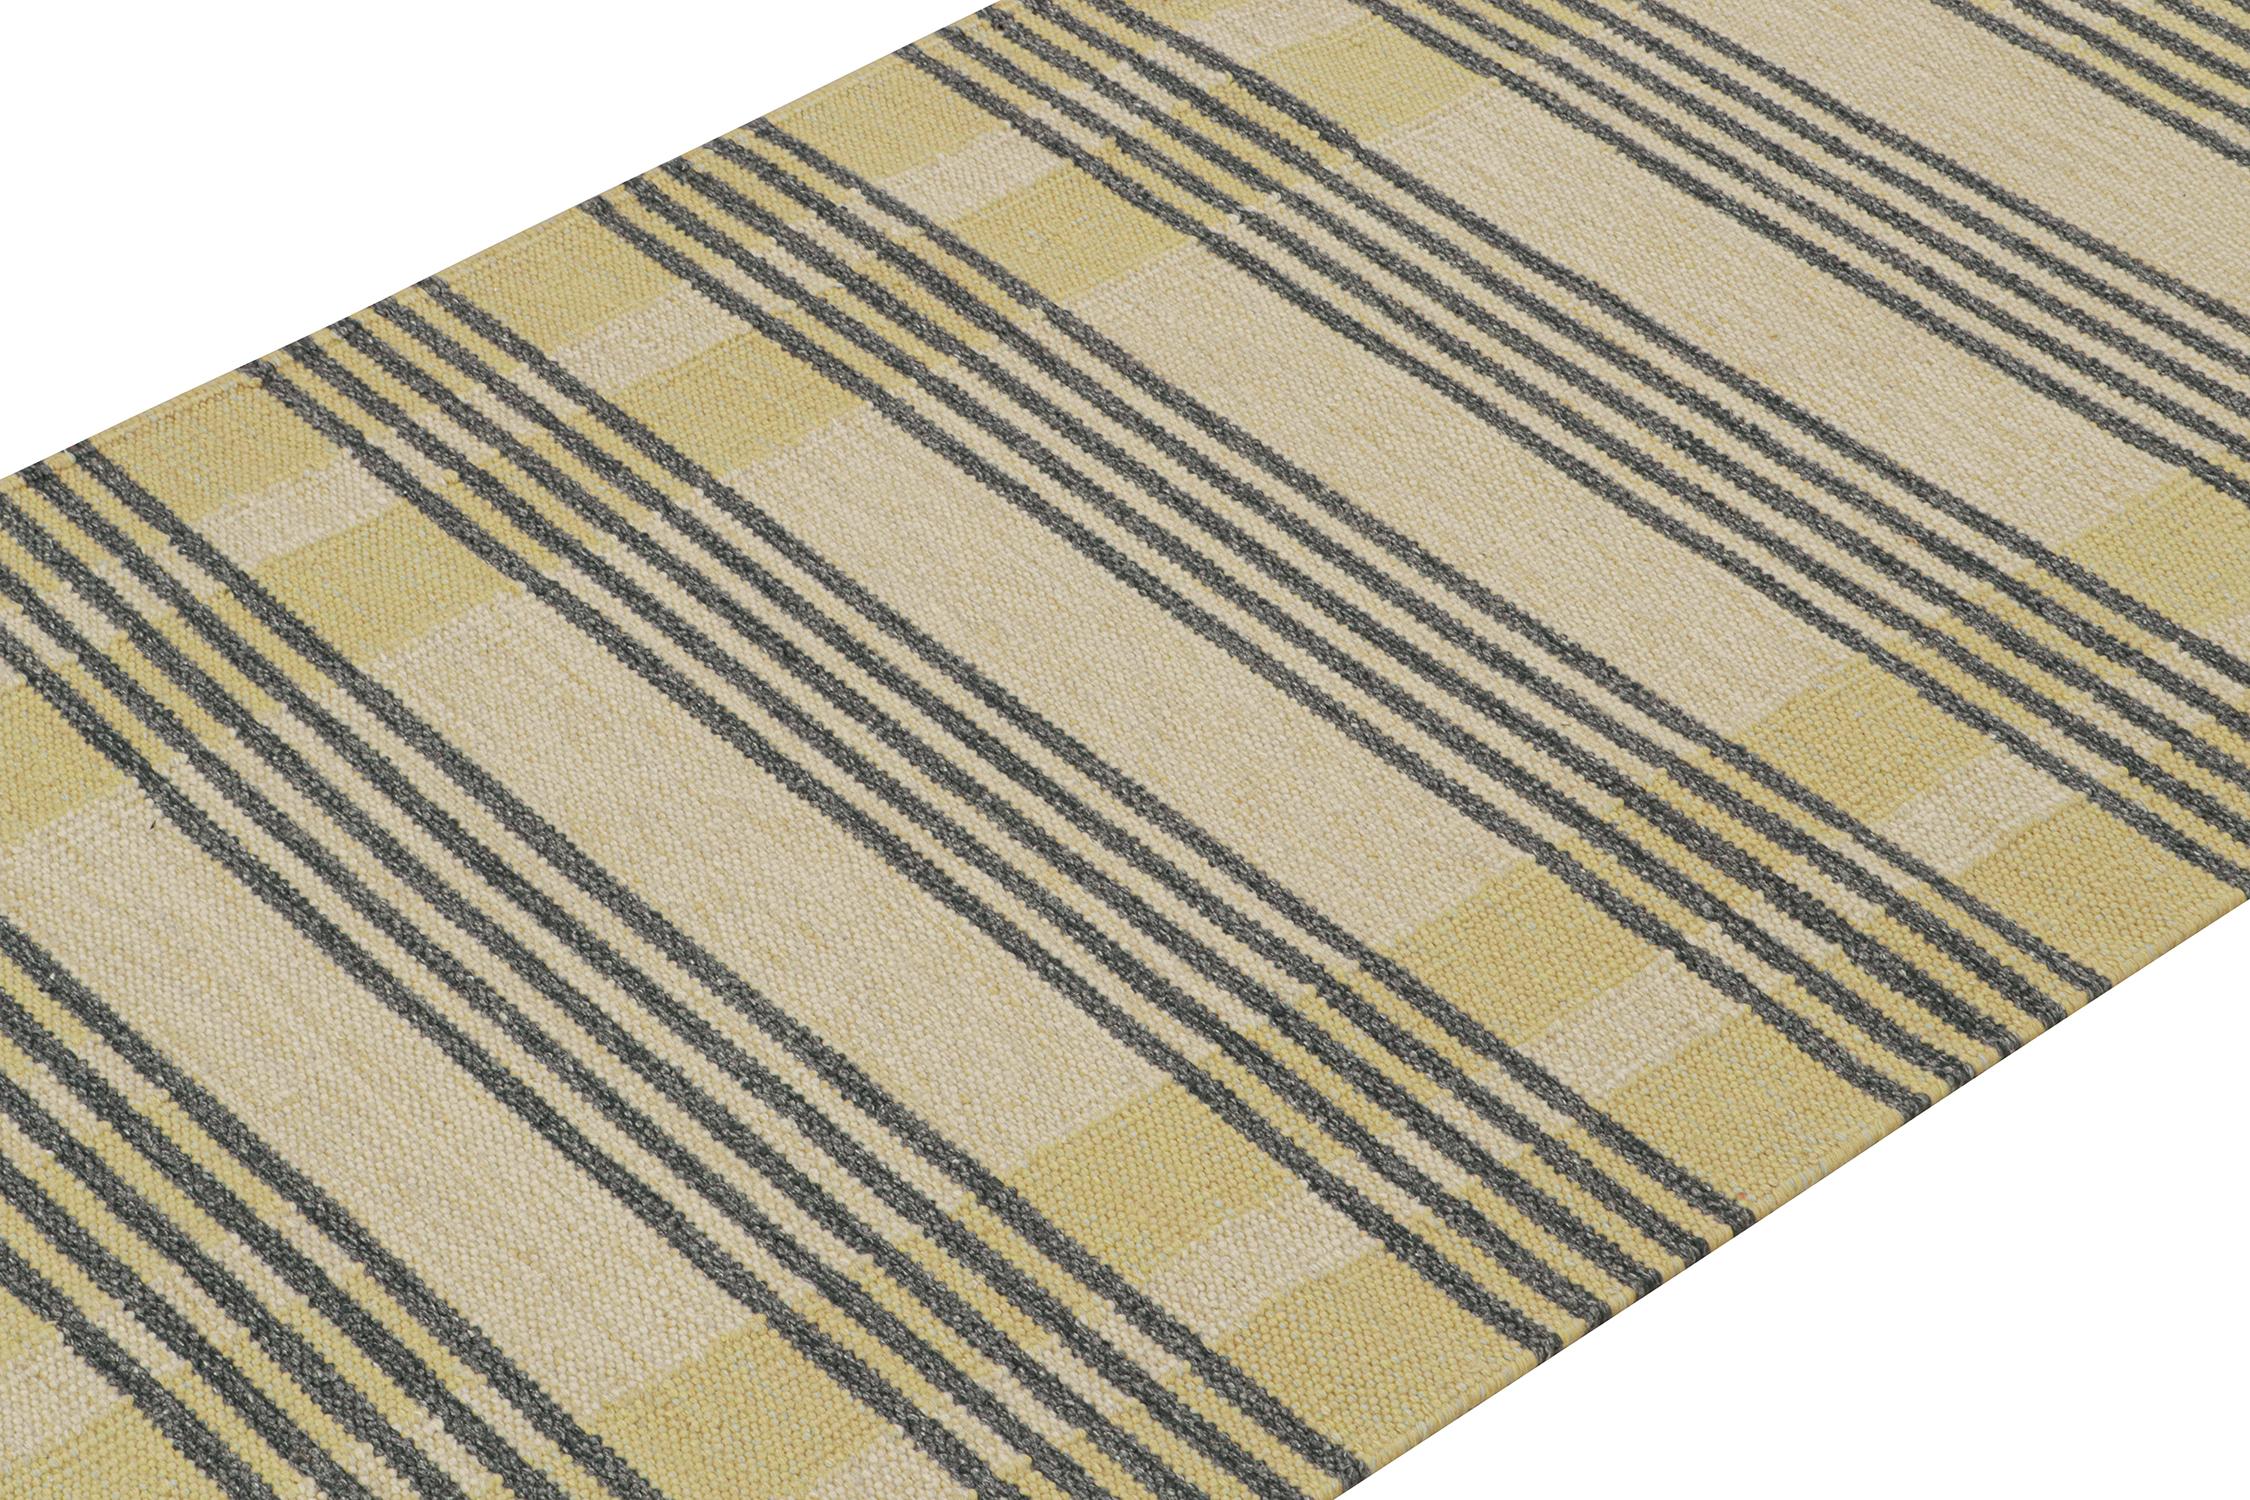 Indian Rug & Kilim’s Scandinavian Style Kilim in Cream with Gray Stripes Patterns For Sale